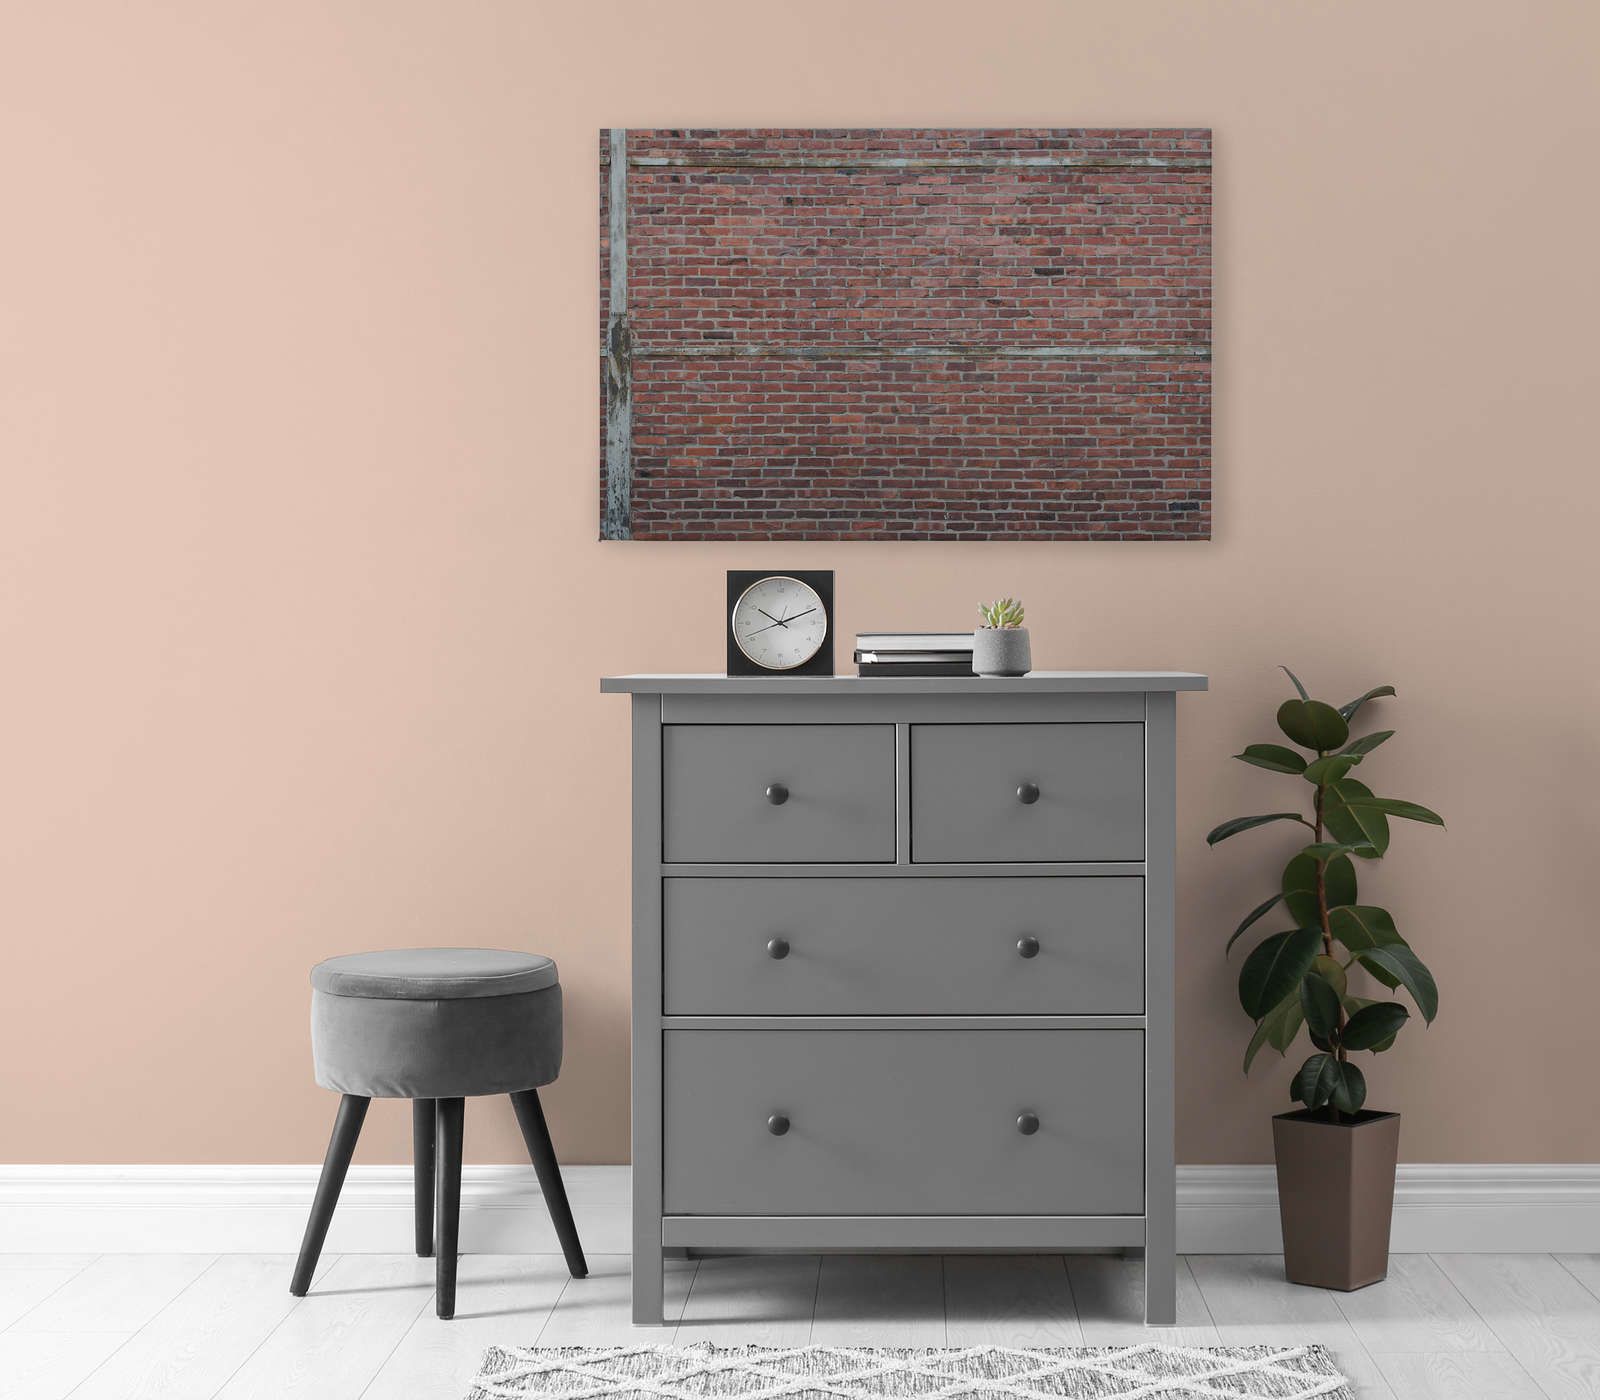             Canvas painting red brick wall in stone look - 0,90 m x 0,60 m
        